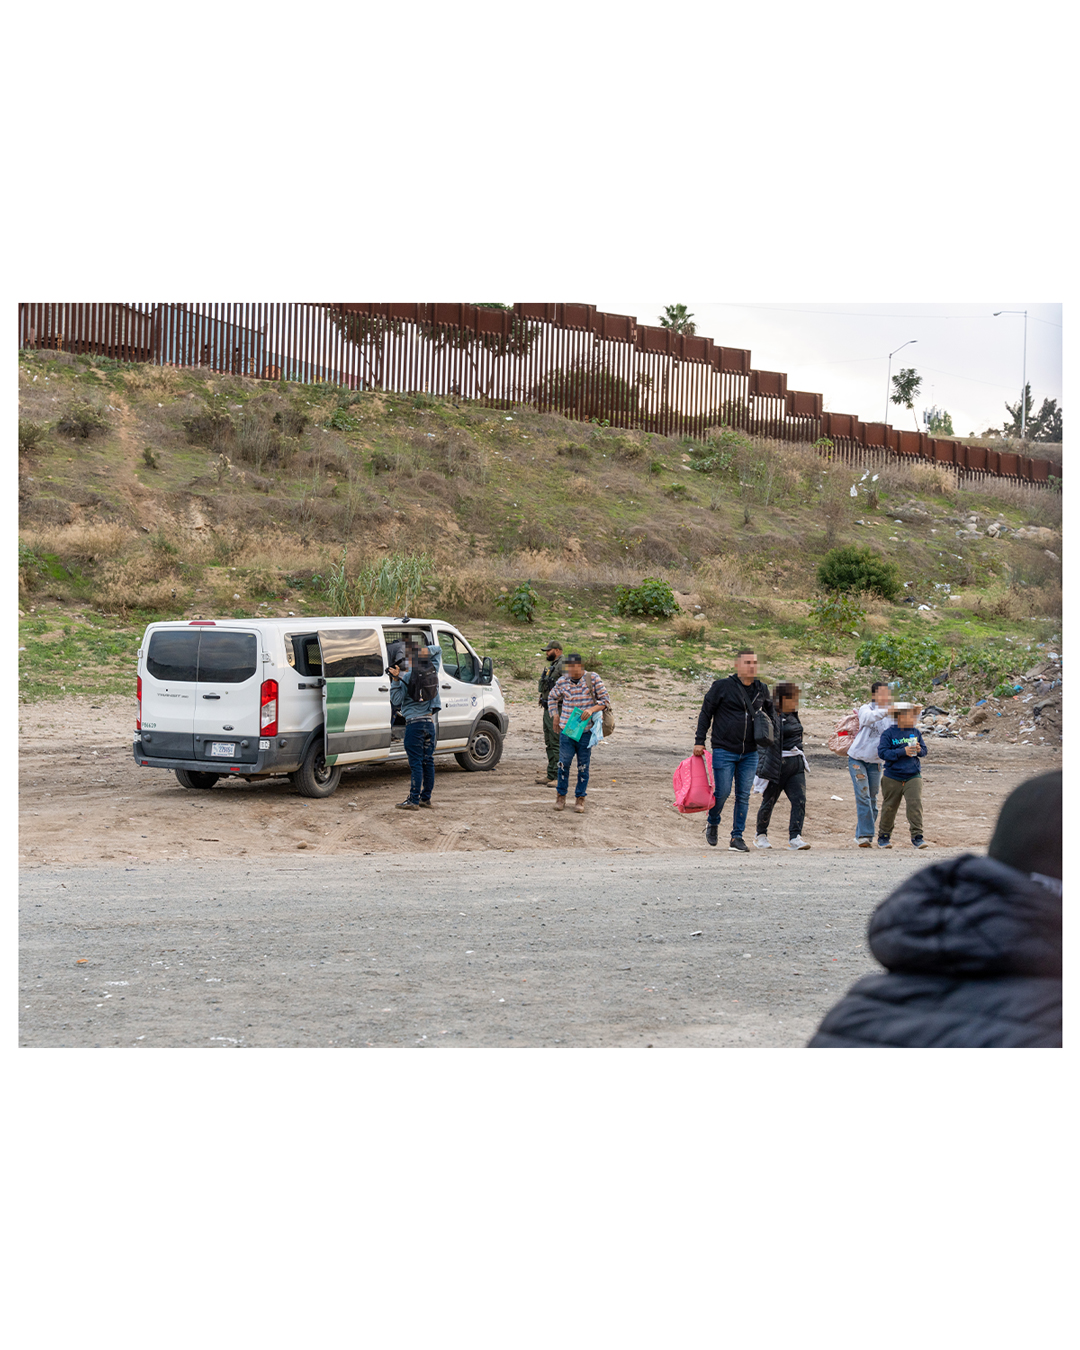 A Border Patrol agent supervises as migrant families leave a vehicle; in the foreground, as four migrants walk away, a woman can be seen adjusting a sunhat on a young child. Each person is carrying nothing but a backpack as they walk away from the van.